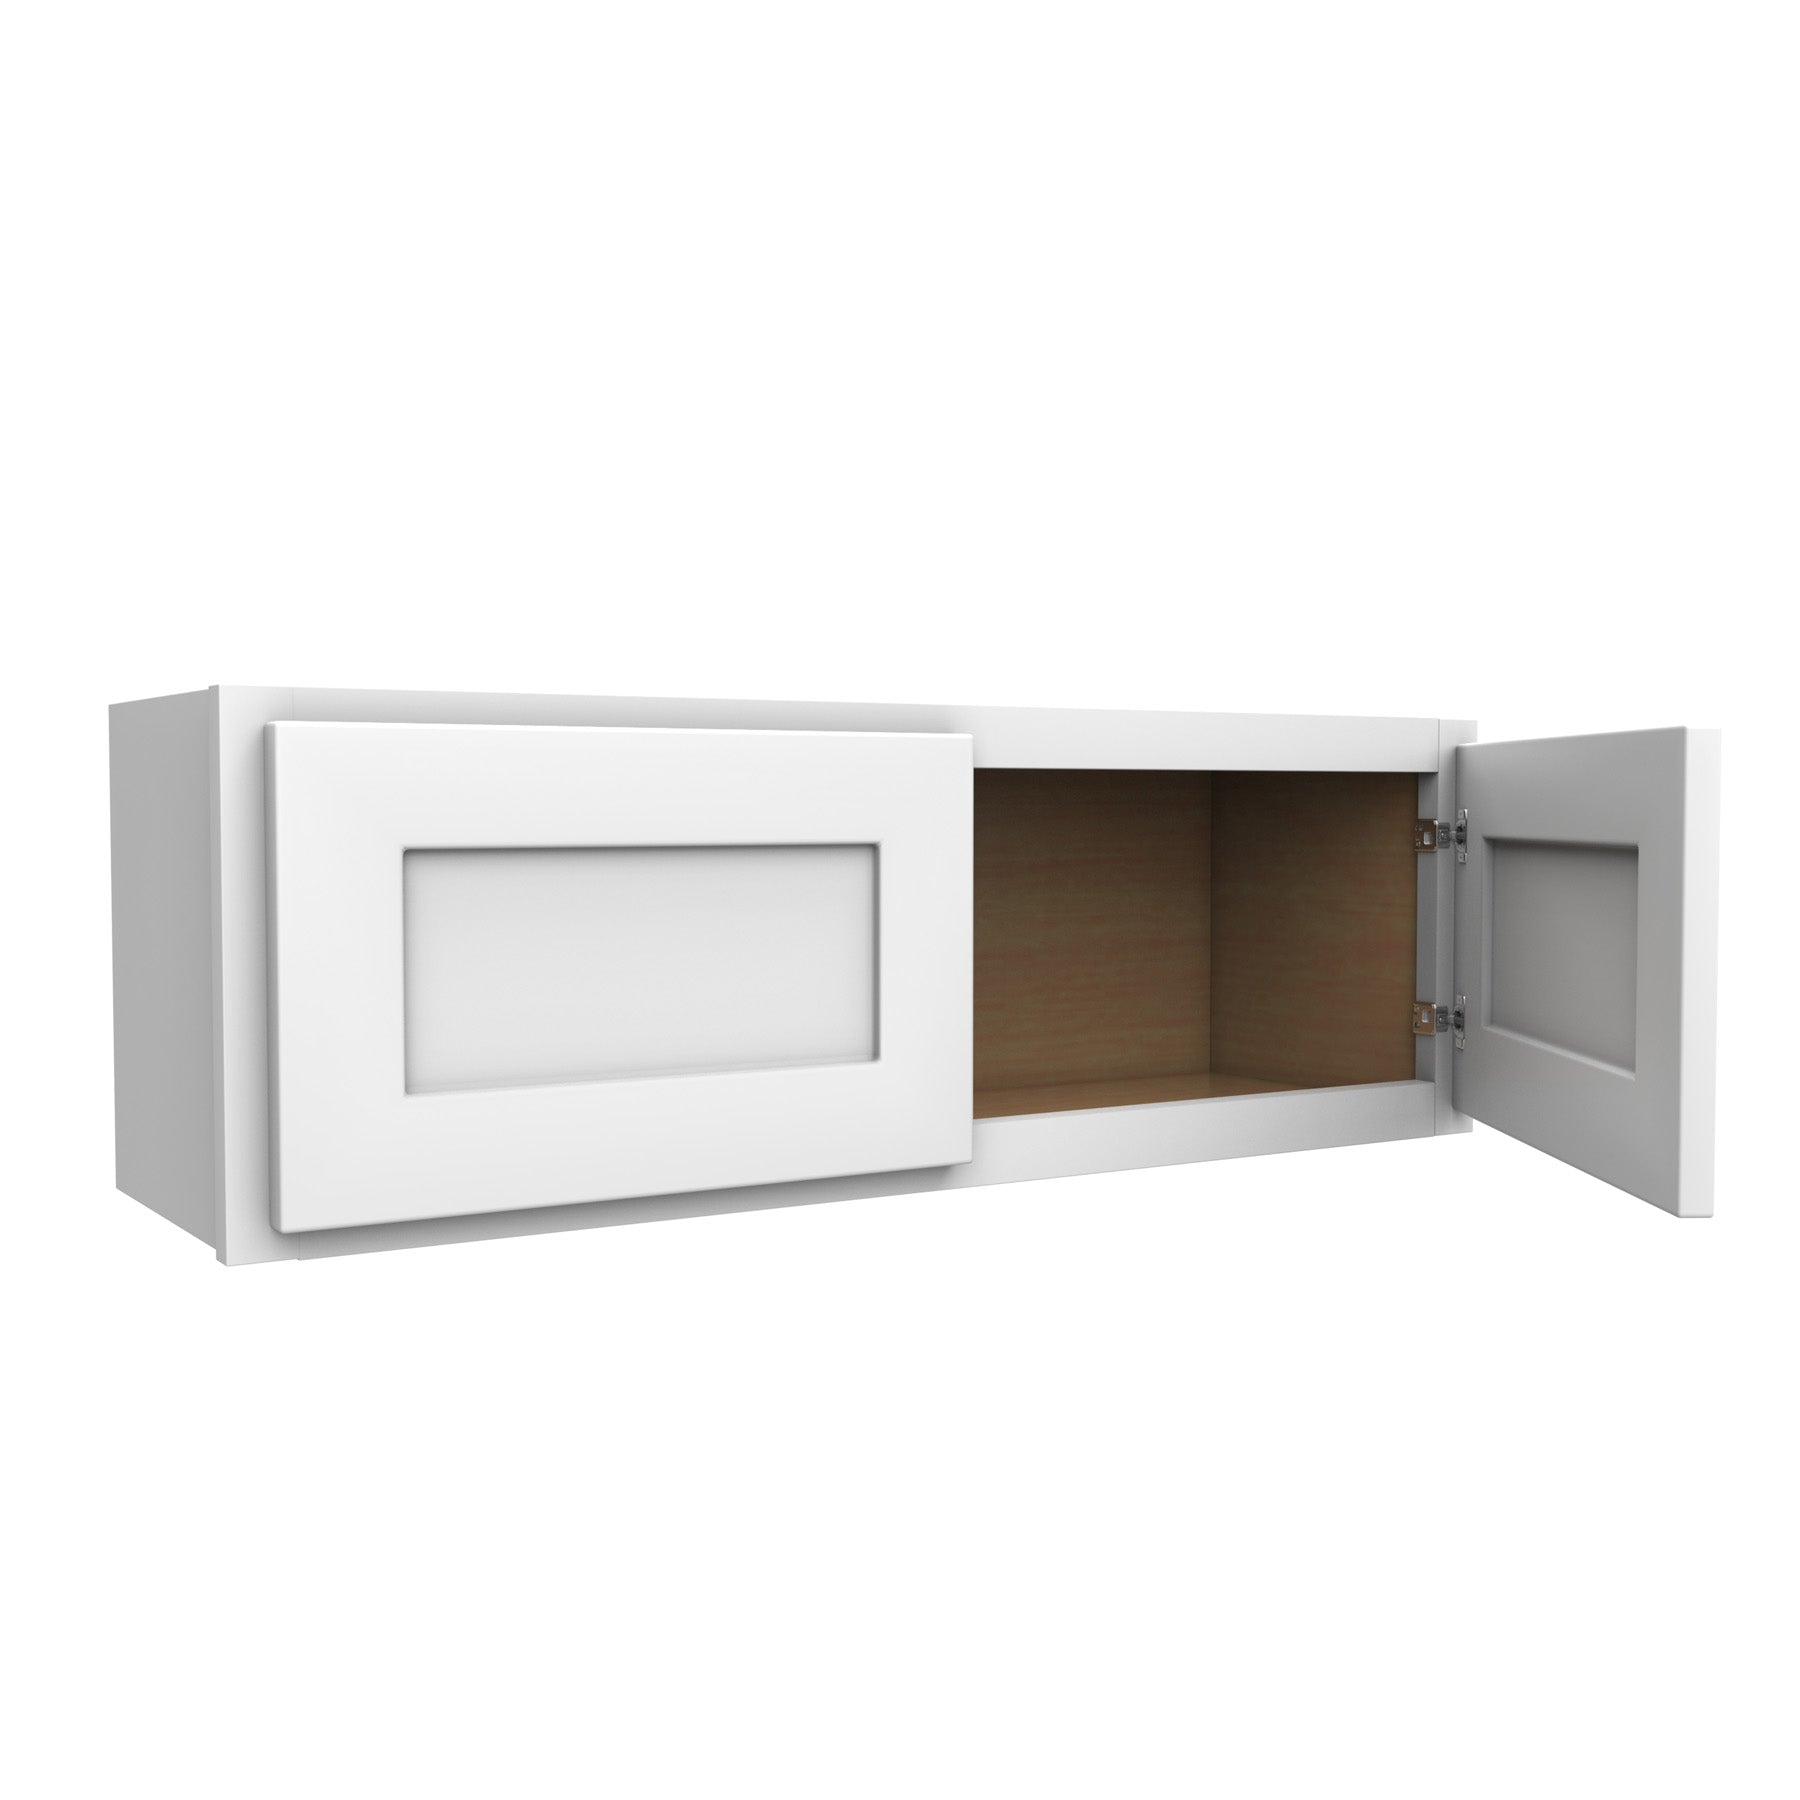 Luxor White - Double Door Wall Cabinet | 36"W x 12"H x 12"D